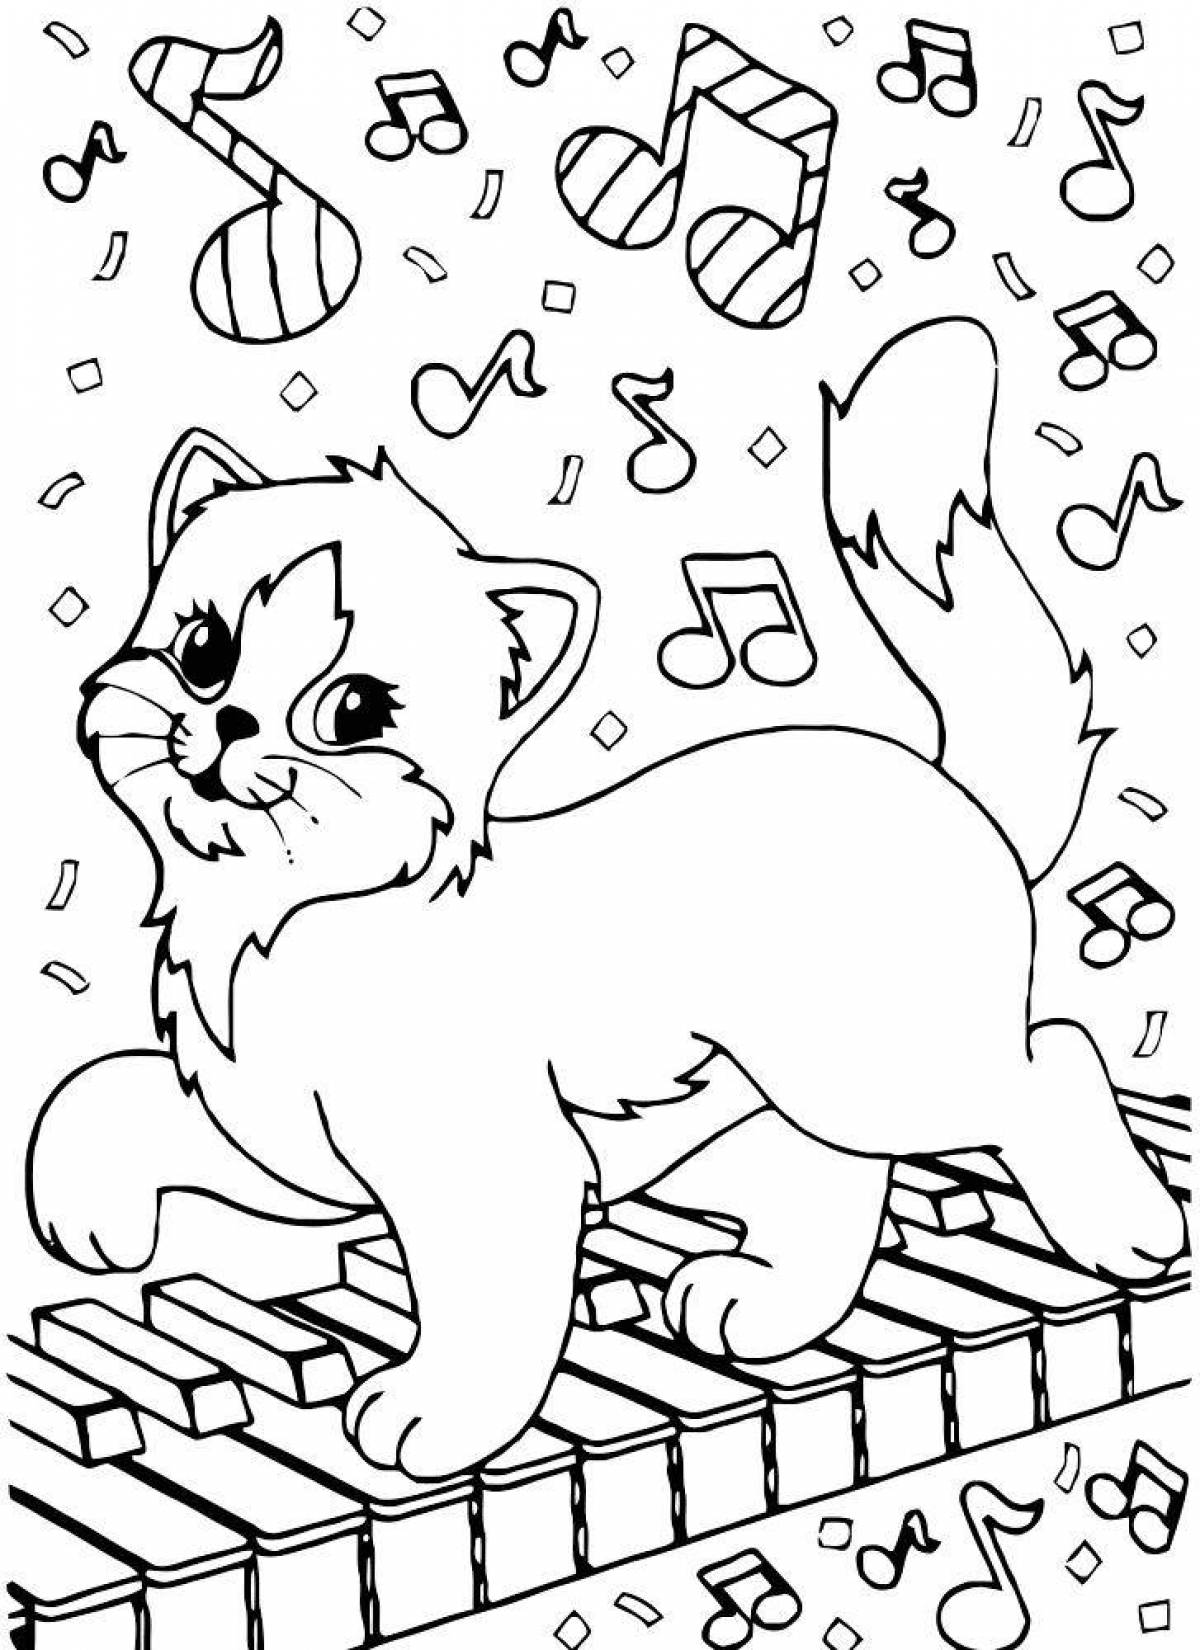 A fun coloring book for kids